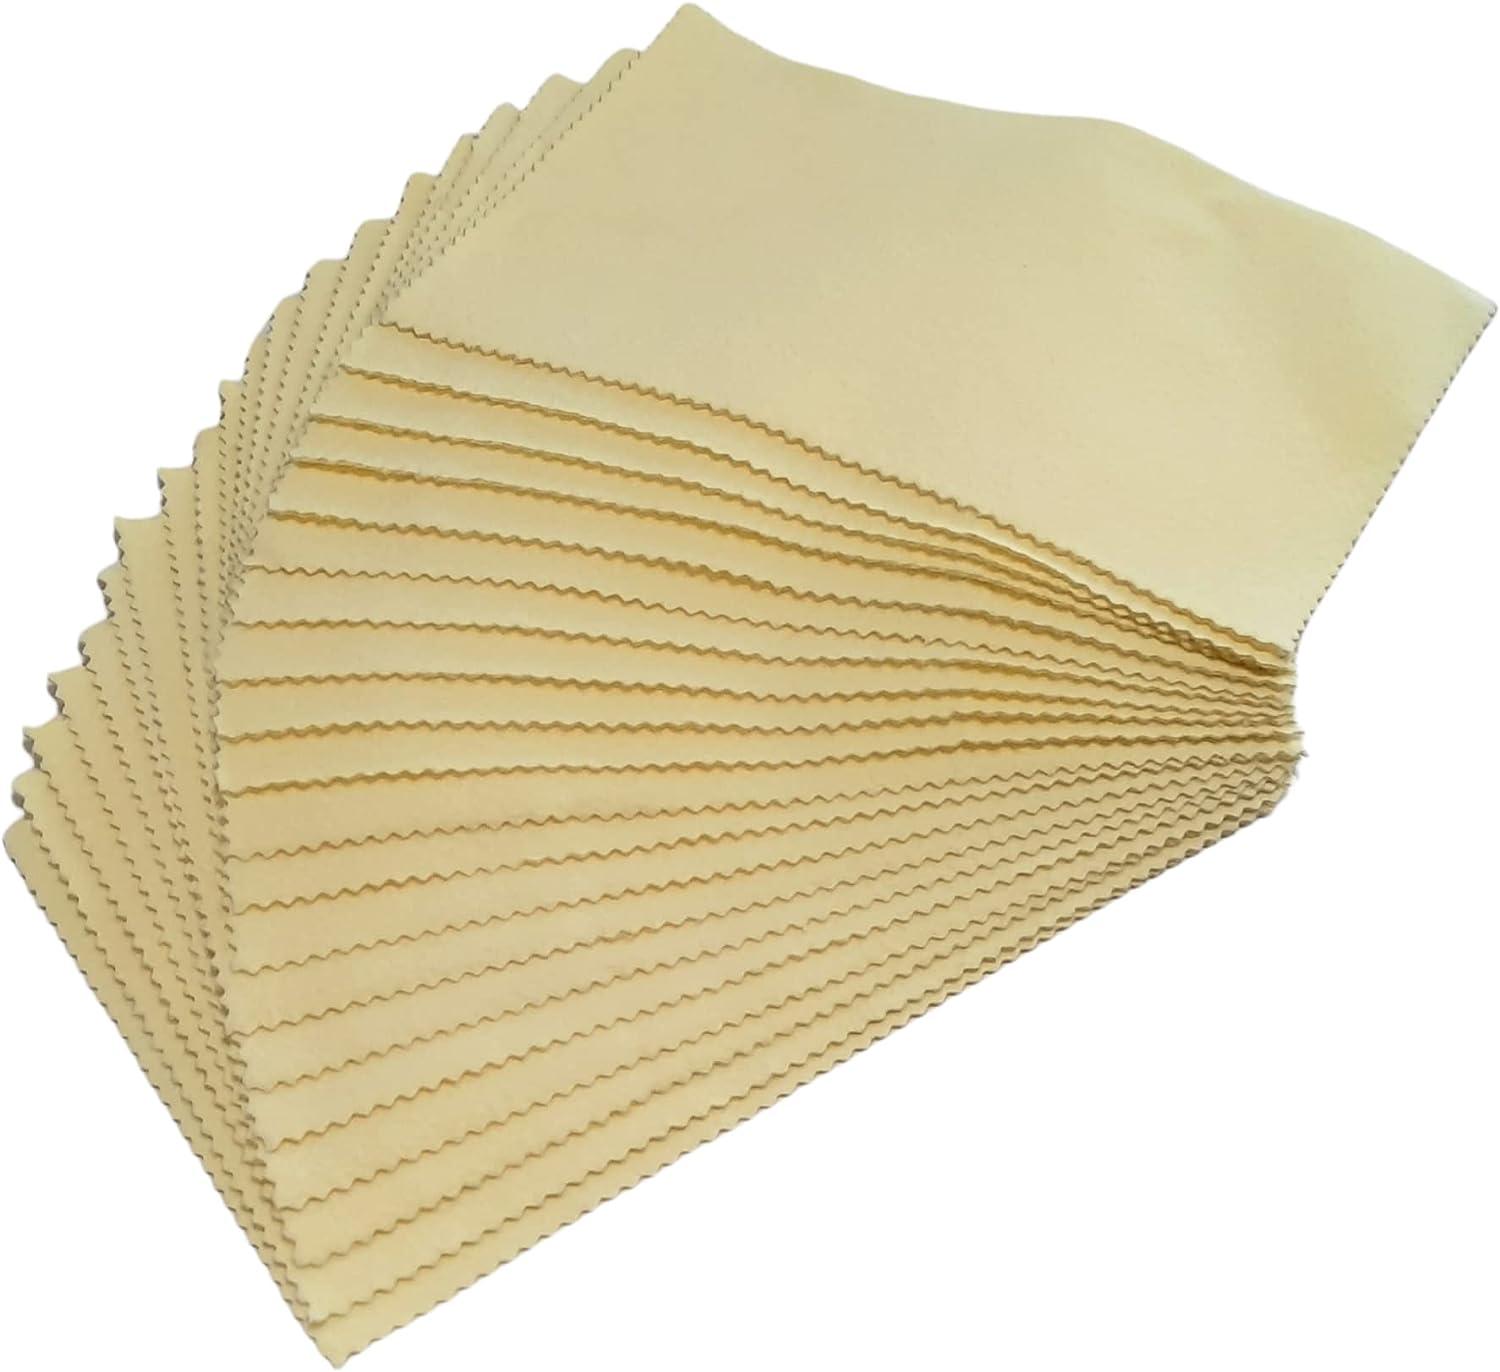 20 Sunshine Polishing Cloth for Sterling Silver, Gold, Brass and